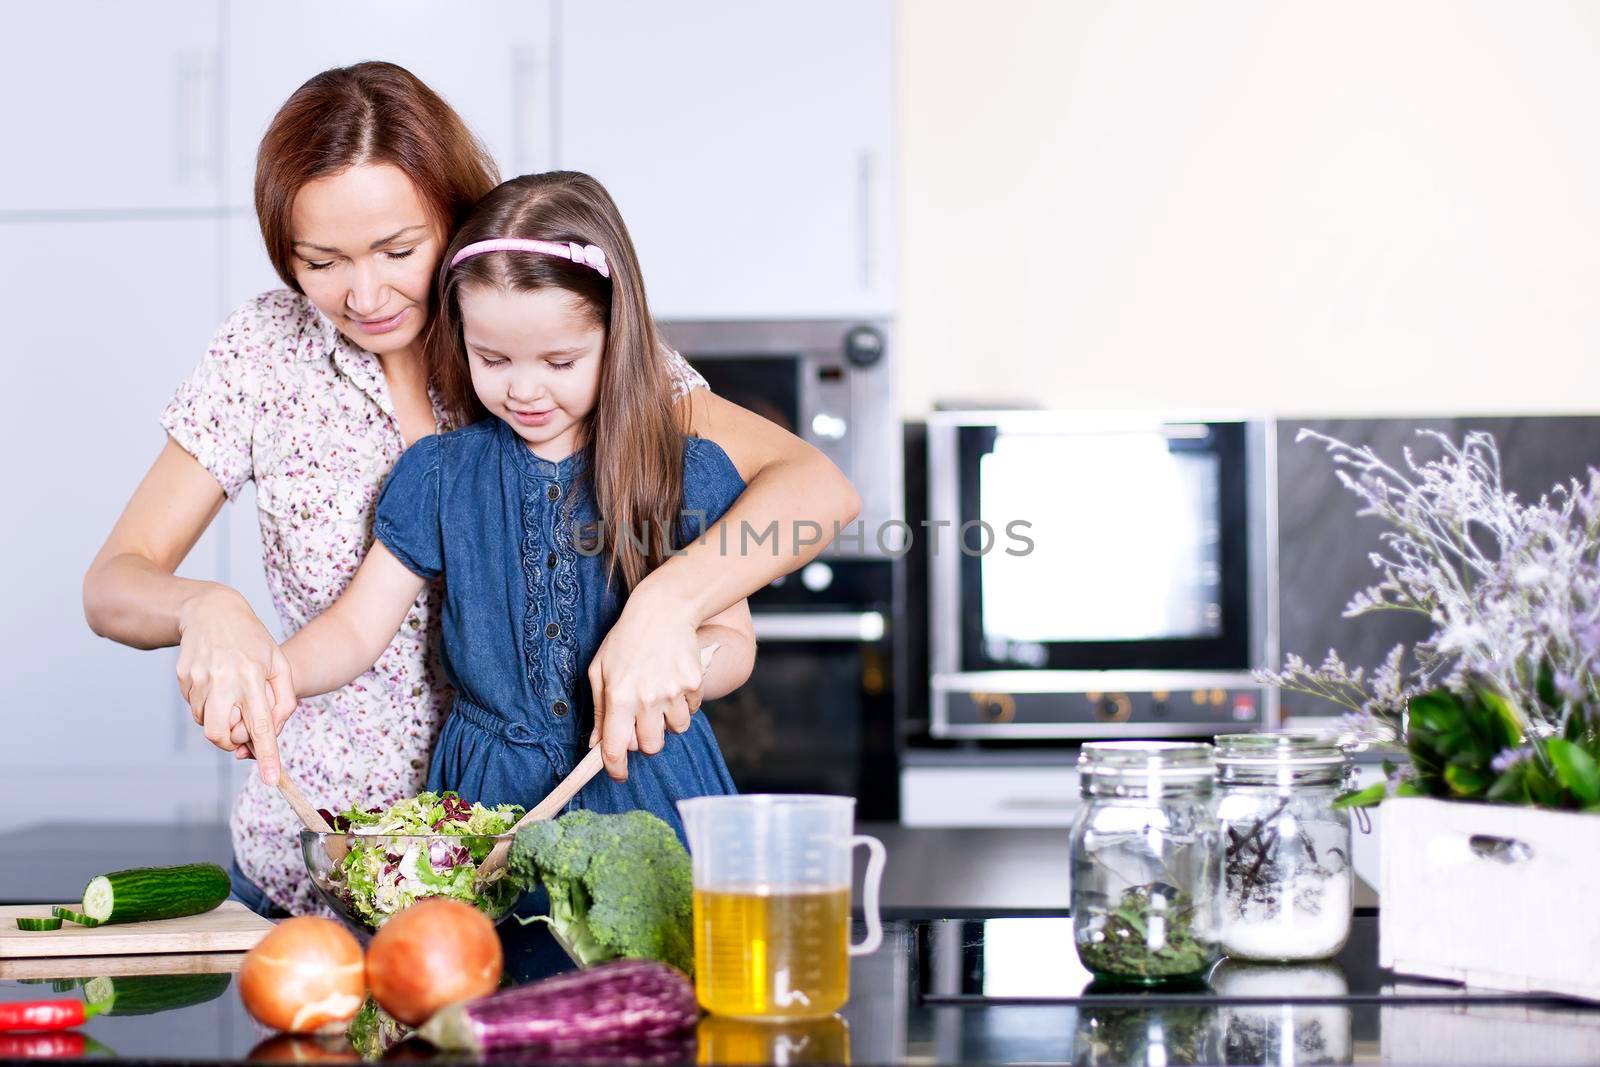 Mother with little daughter cooking in the kitchen at home. Girl Assisting In Preparing Food - Stock image